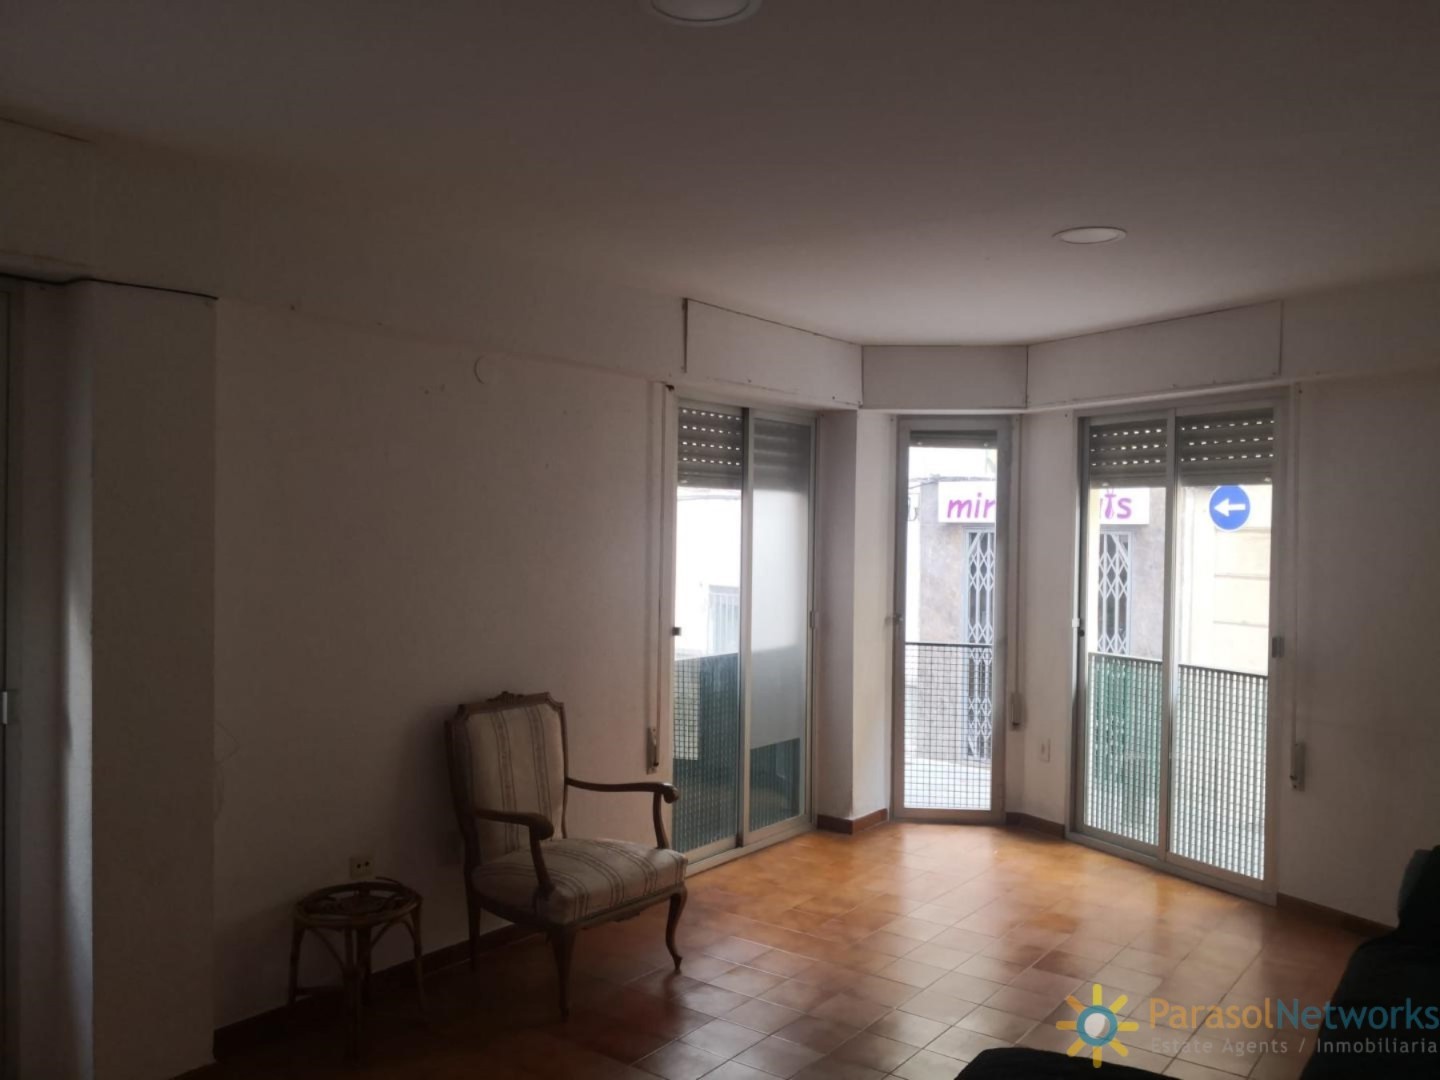 Apartment for sale in Pego- Ref:828